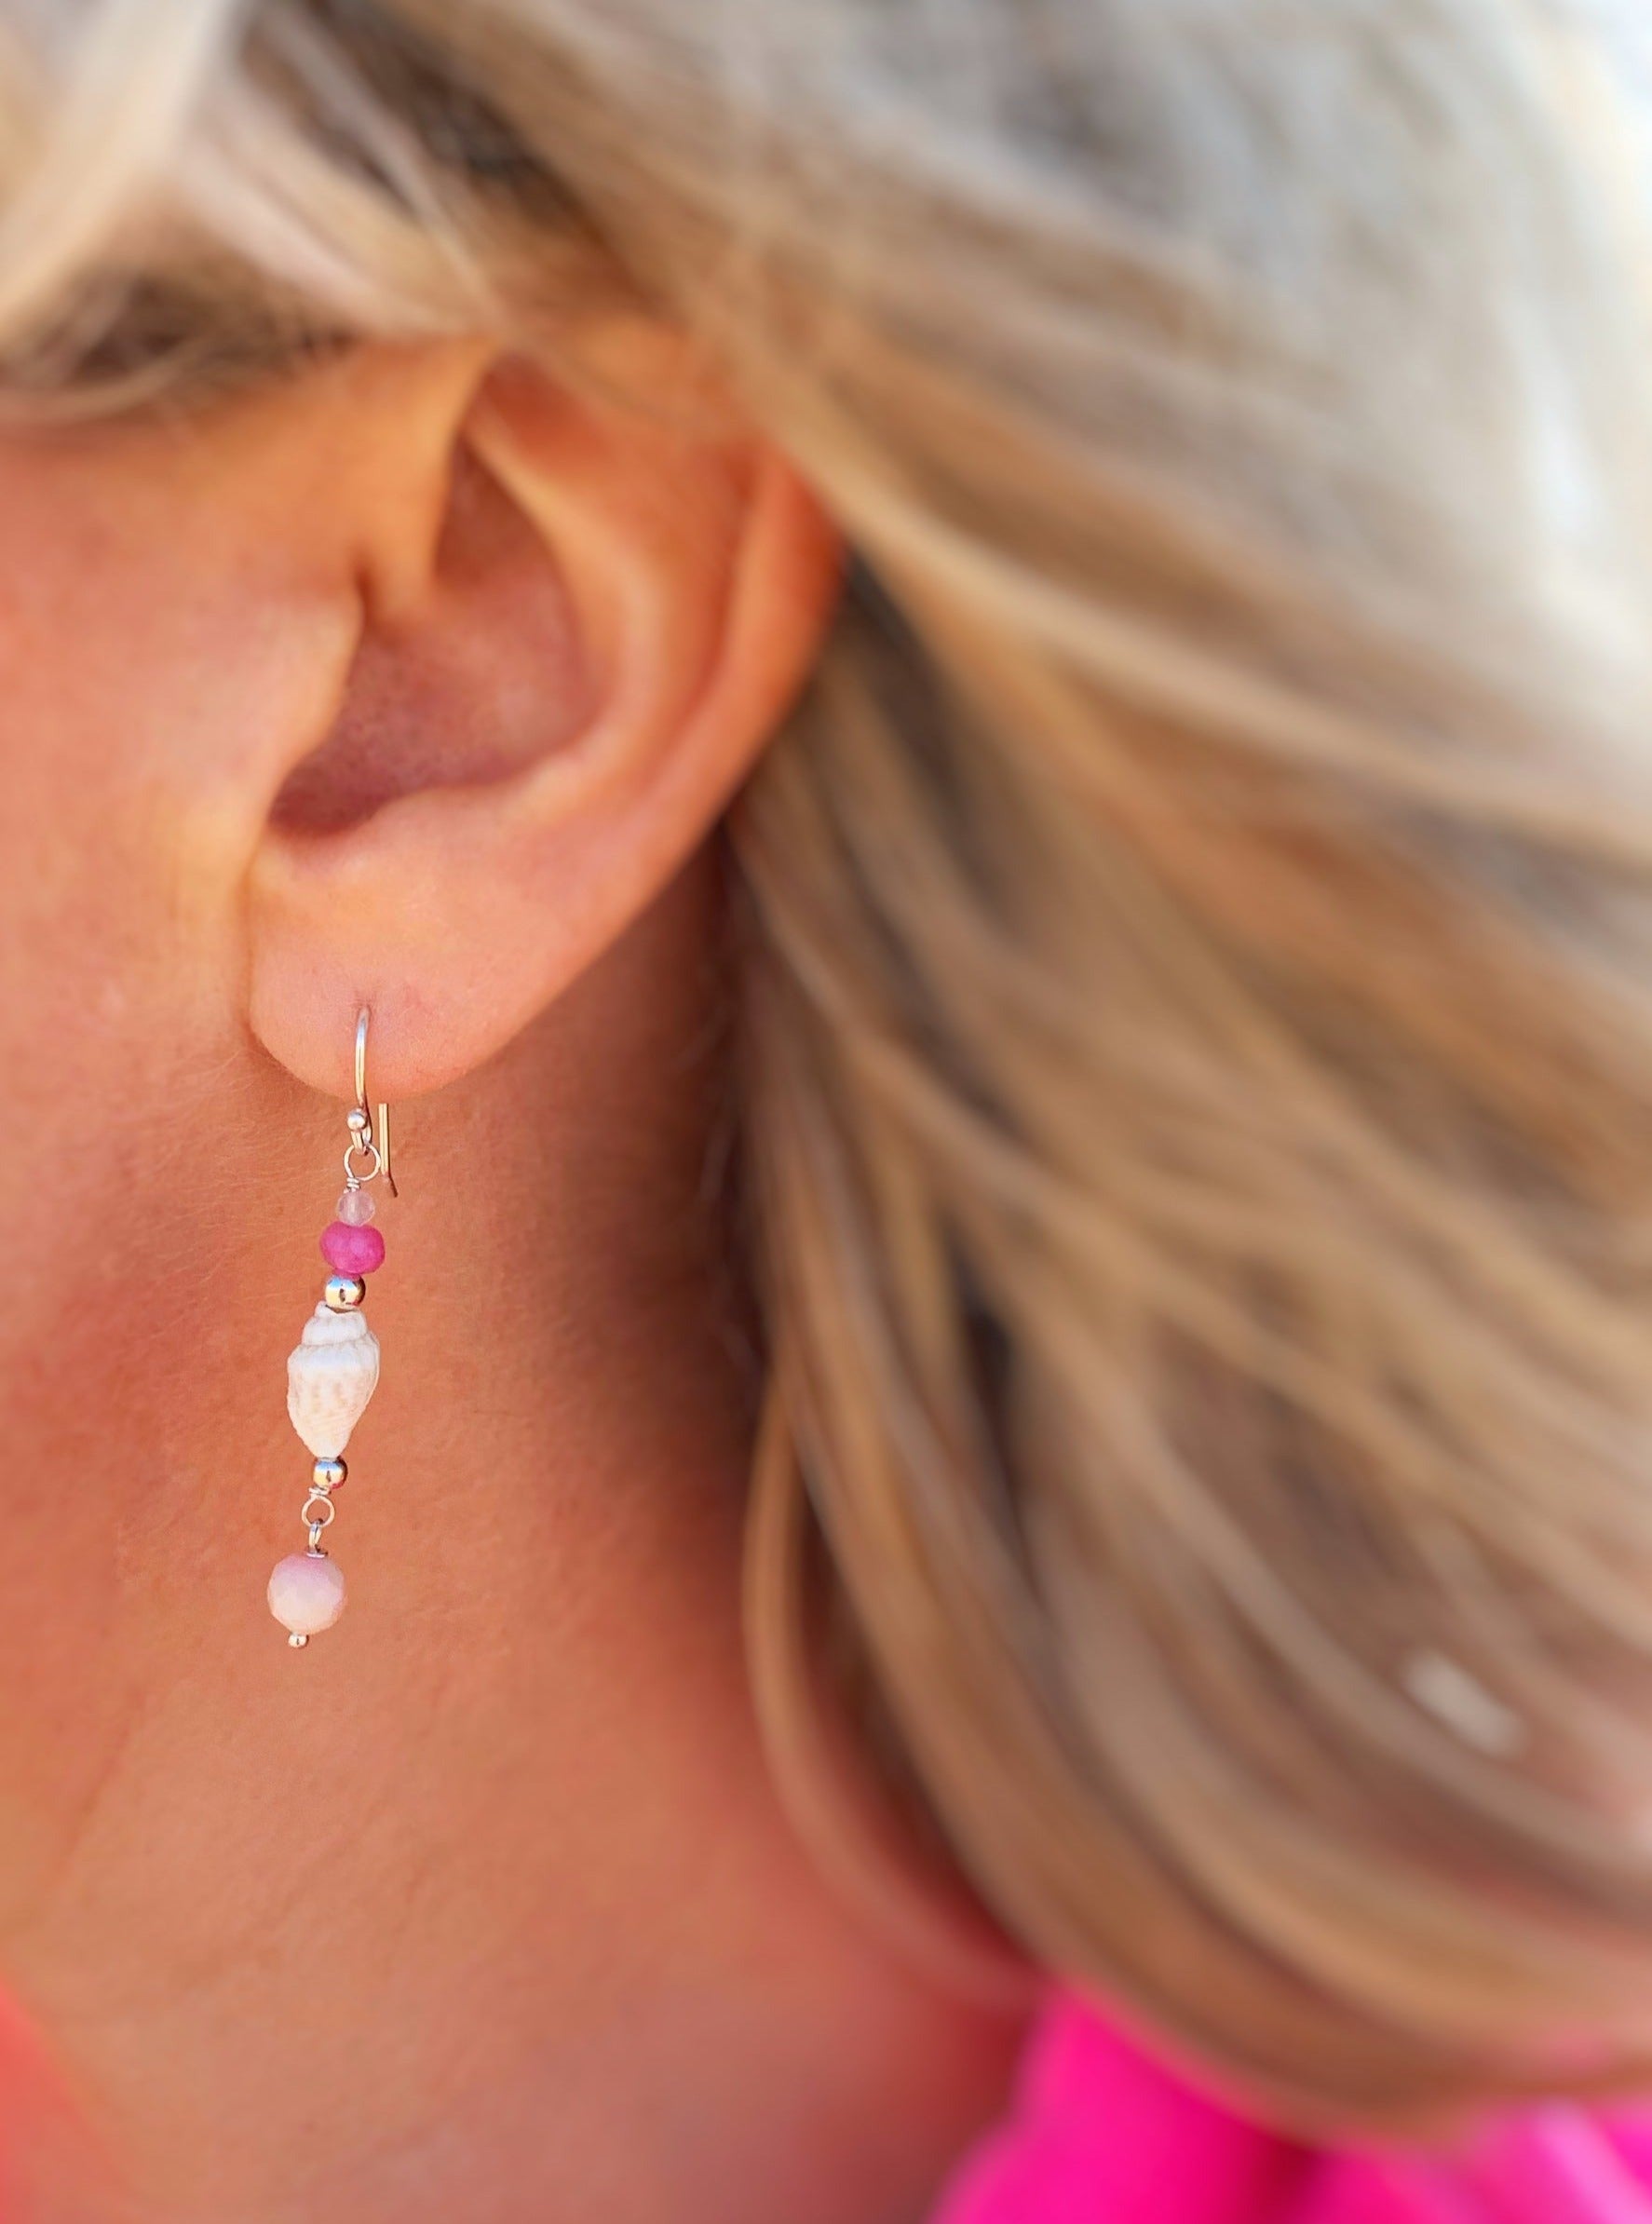 The pink flamingo shellebration earring from mermaids and madeleines is pictured worn here with a close up photo of the earring on an ear